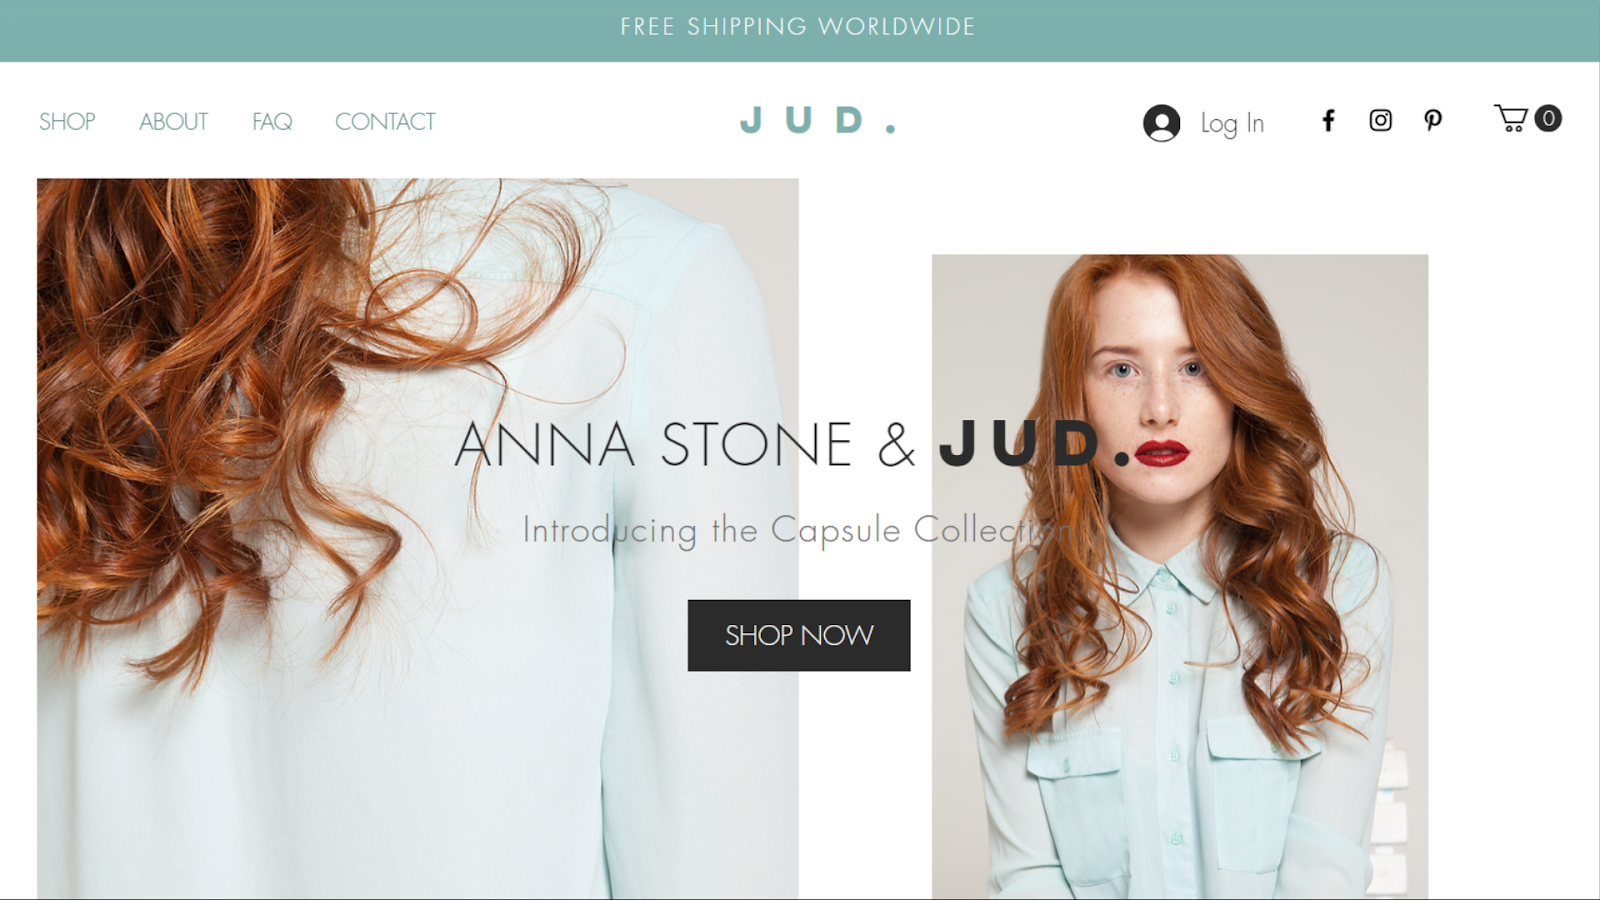 One of the online boutique templates from Wix under the category